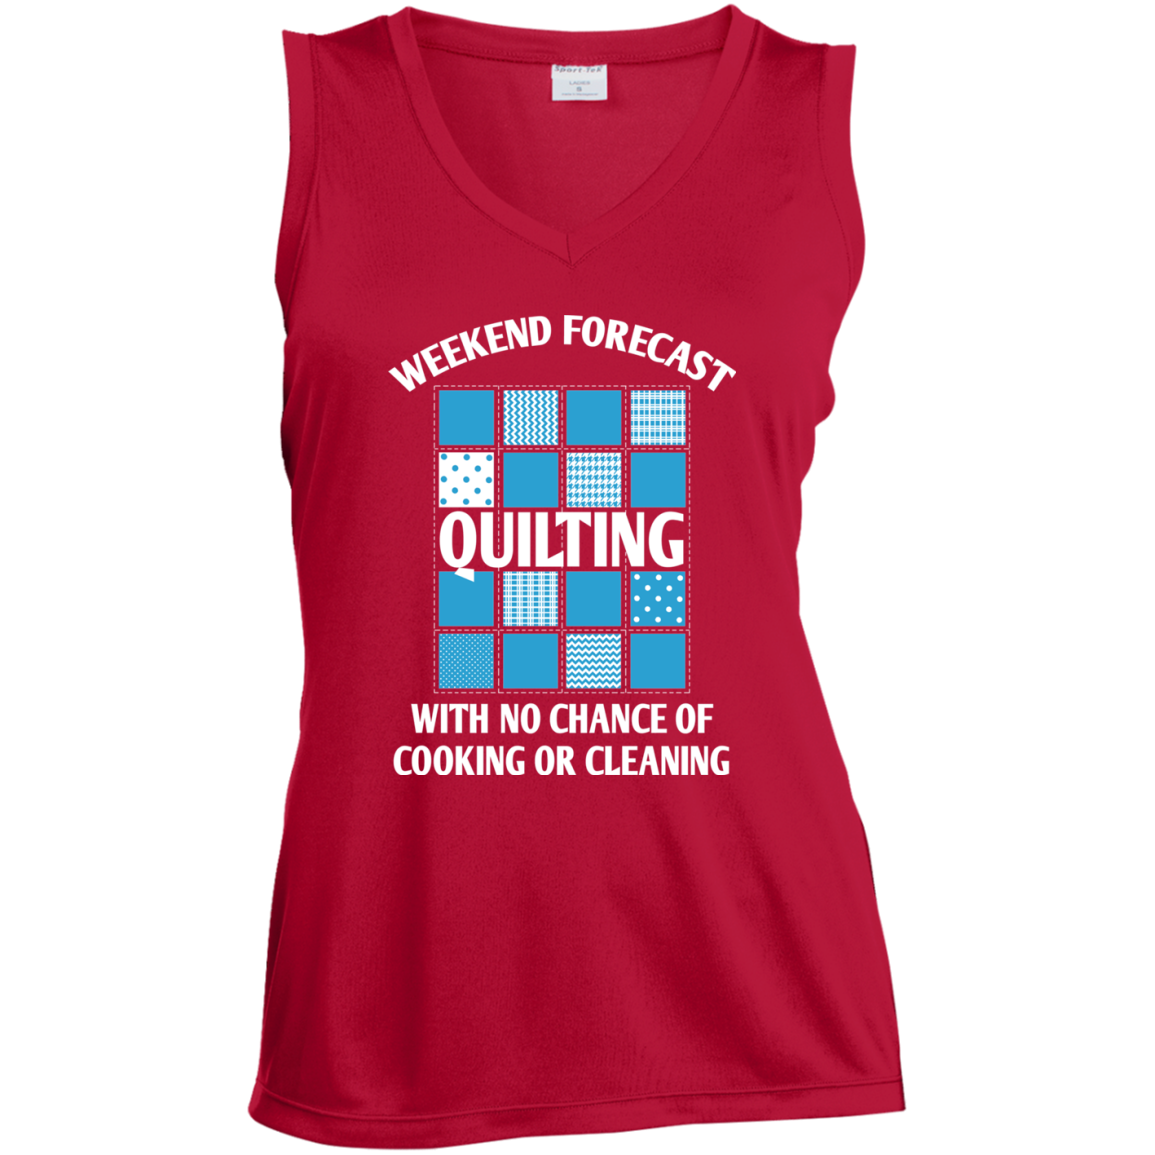 Weekend Forecast Quilting Ladies Sleeveless Moisture Absorbing V-Neck